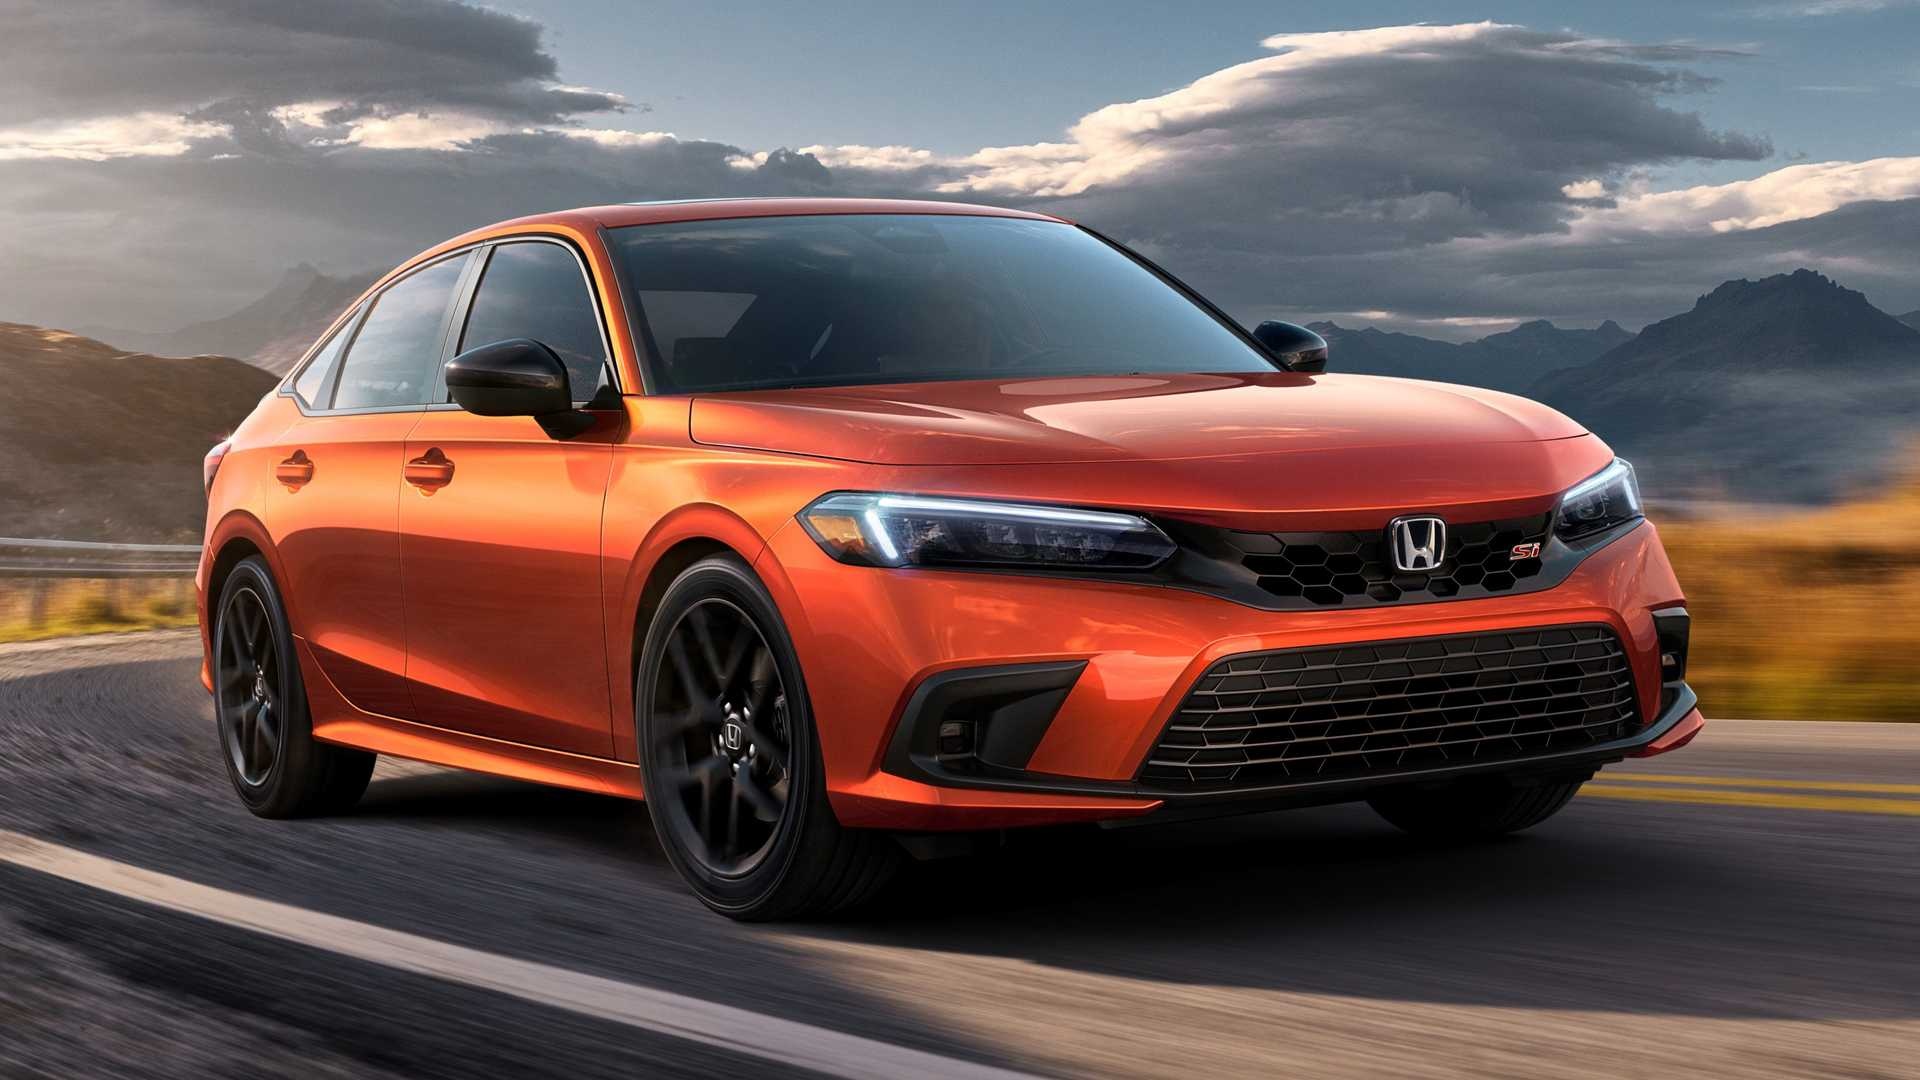 Honda Civic Si, Performance compact, Exciting driving, Sporty design, 1920x1080 Full HD Desktop